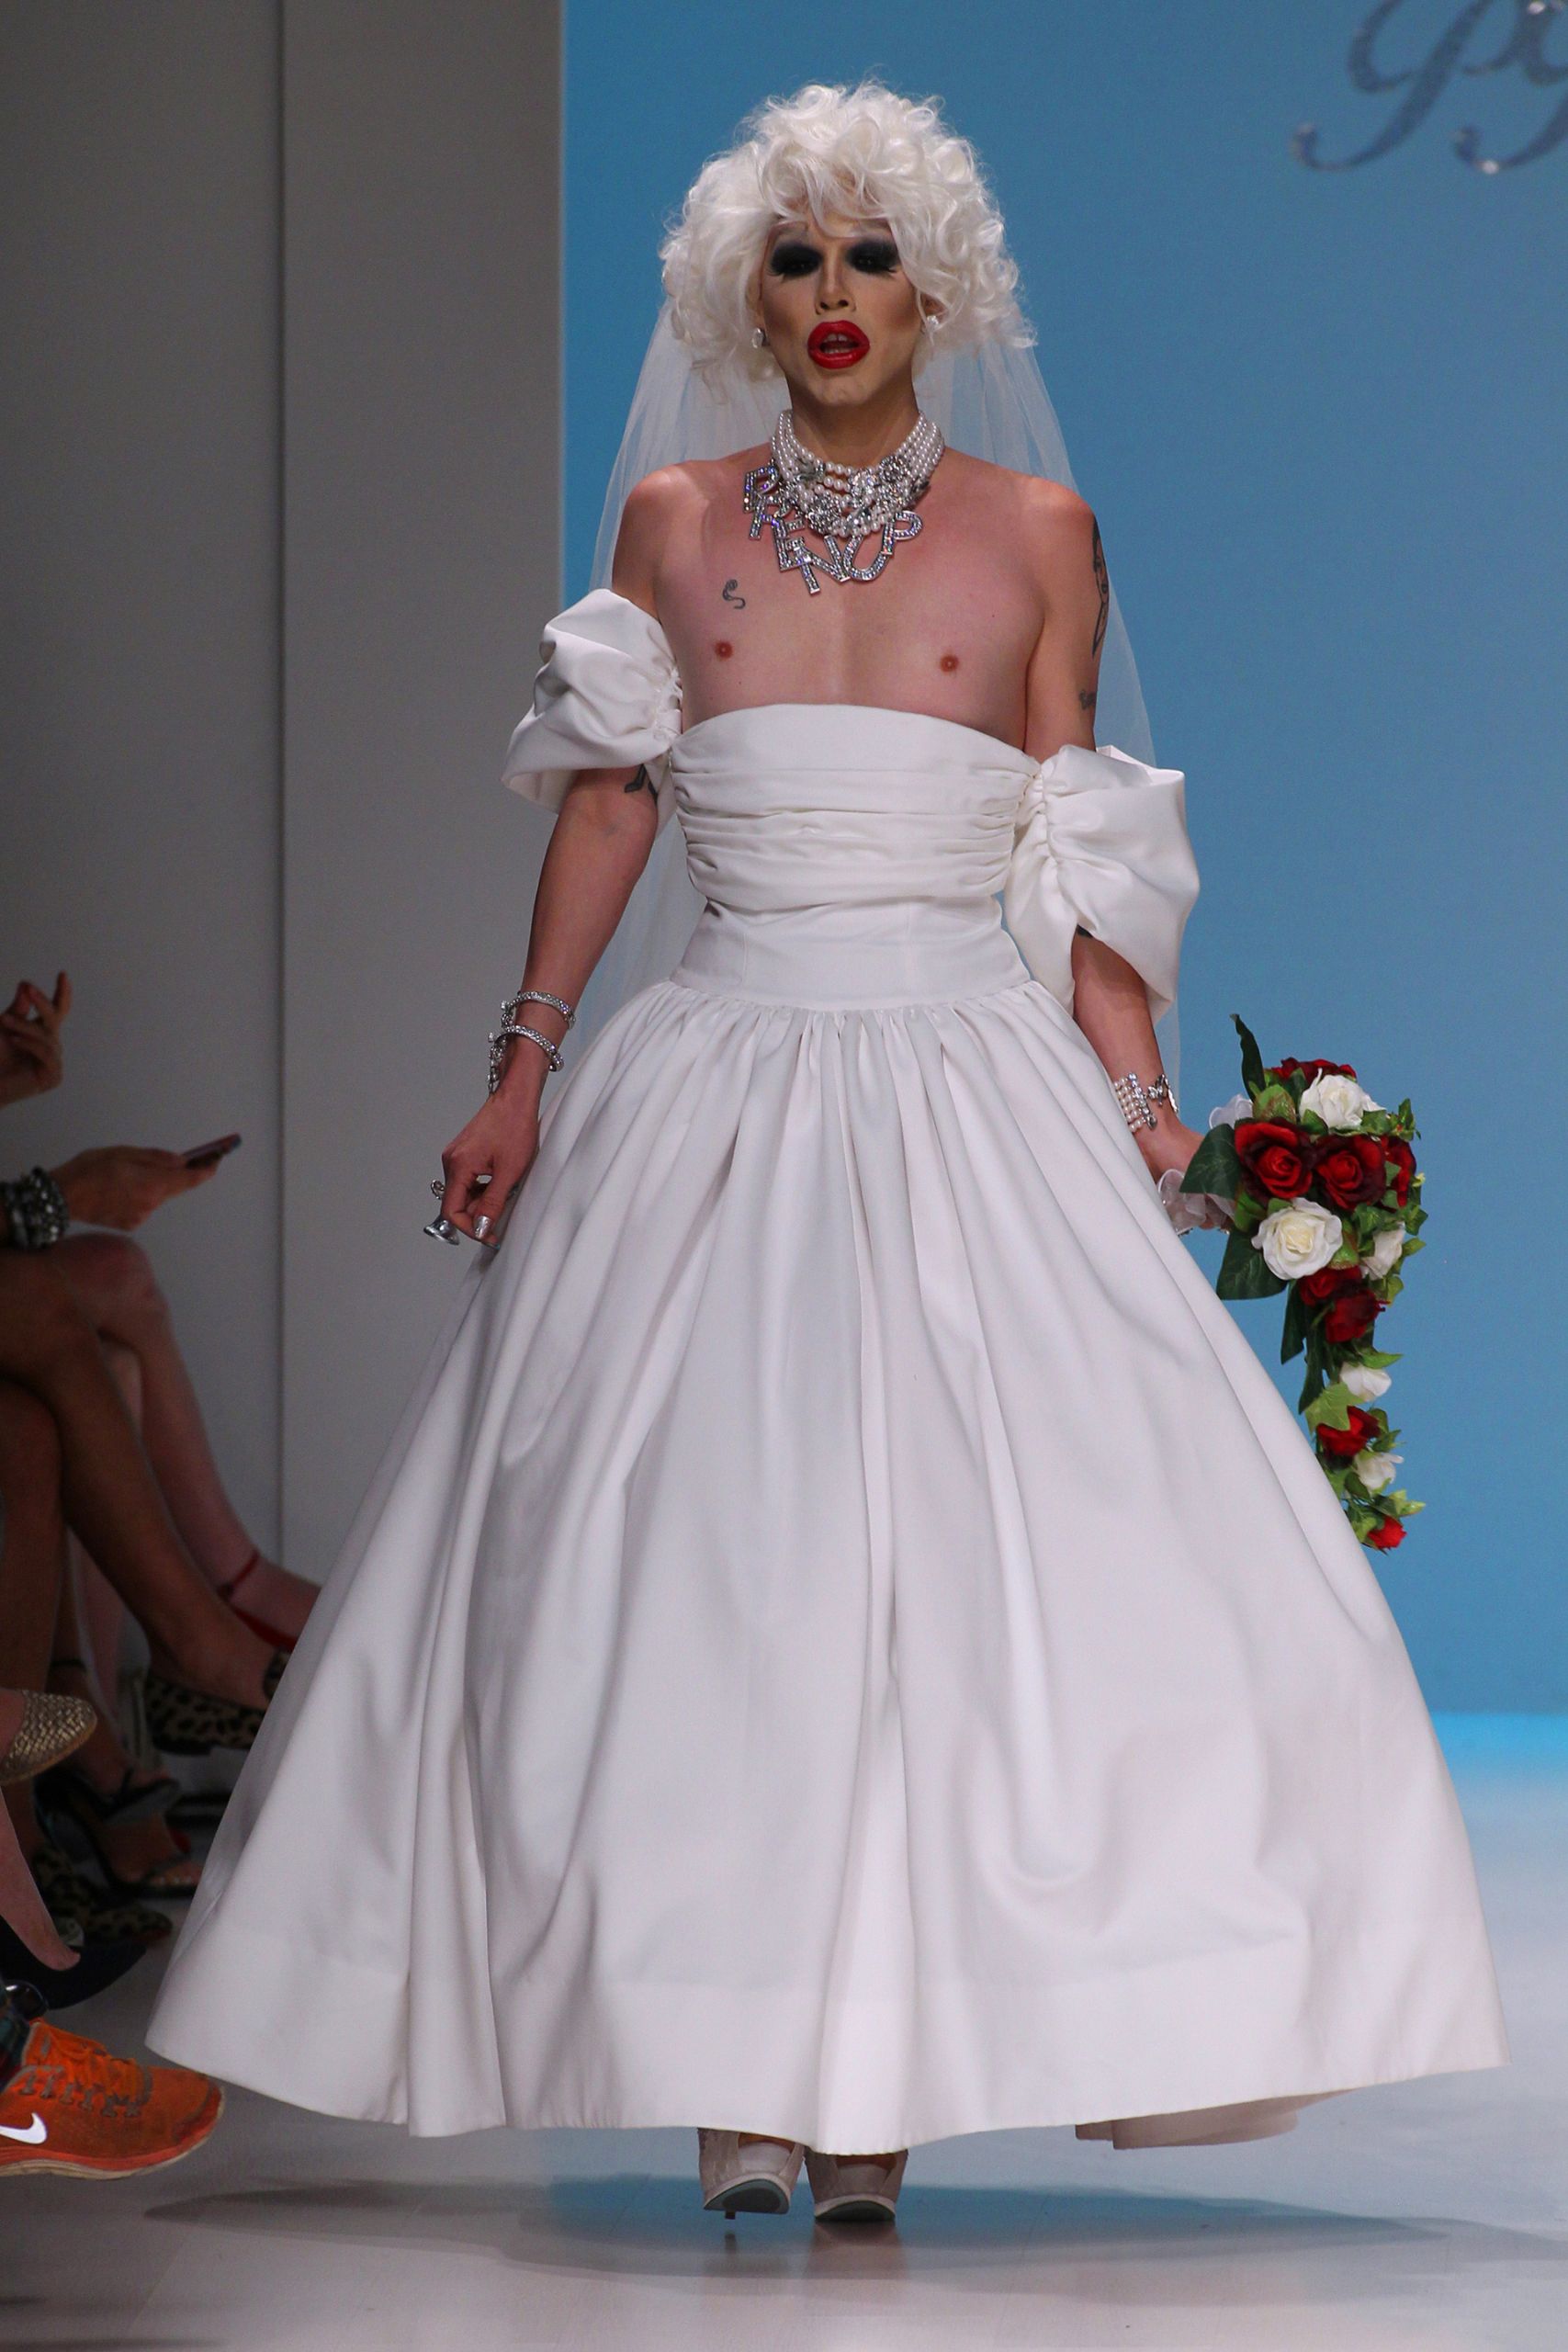 Betsey Johnson Wedding Gowns
 Betsey Johnson tackles marriage in her Fashion Week show